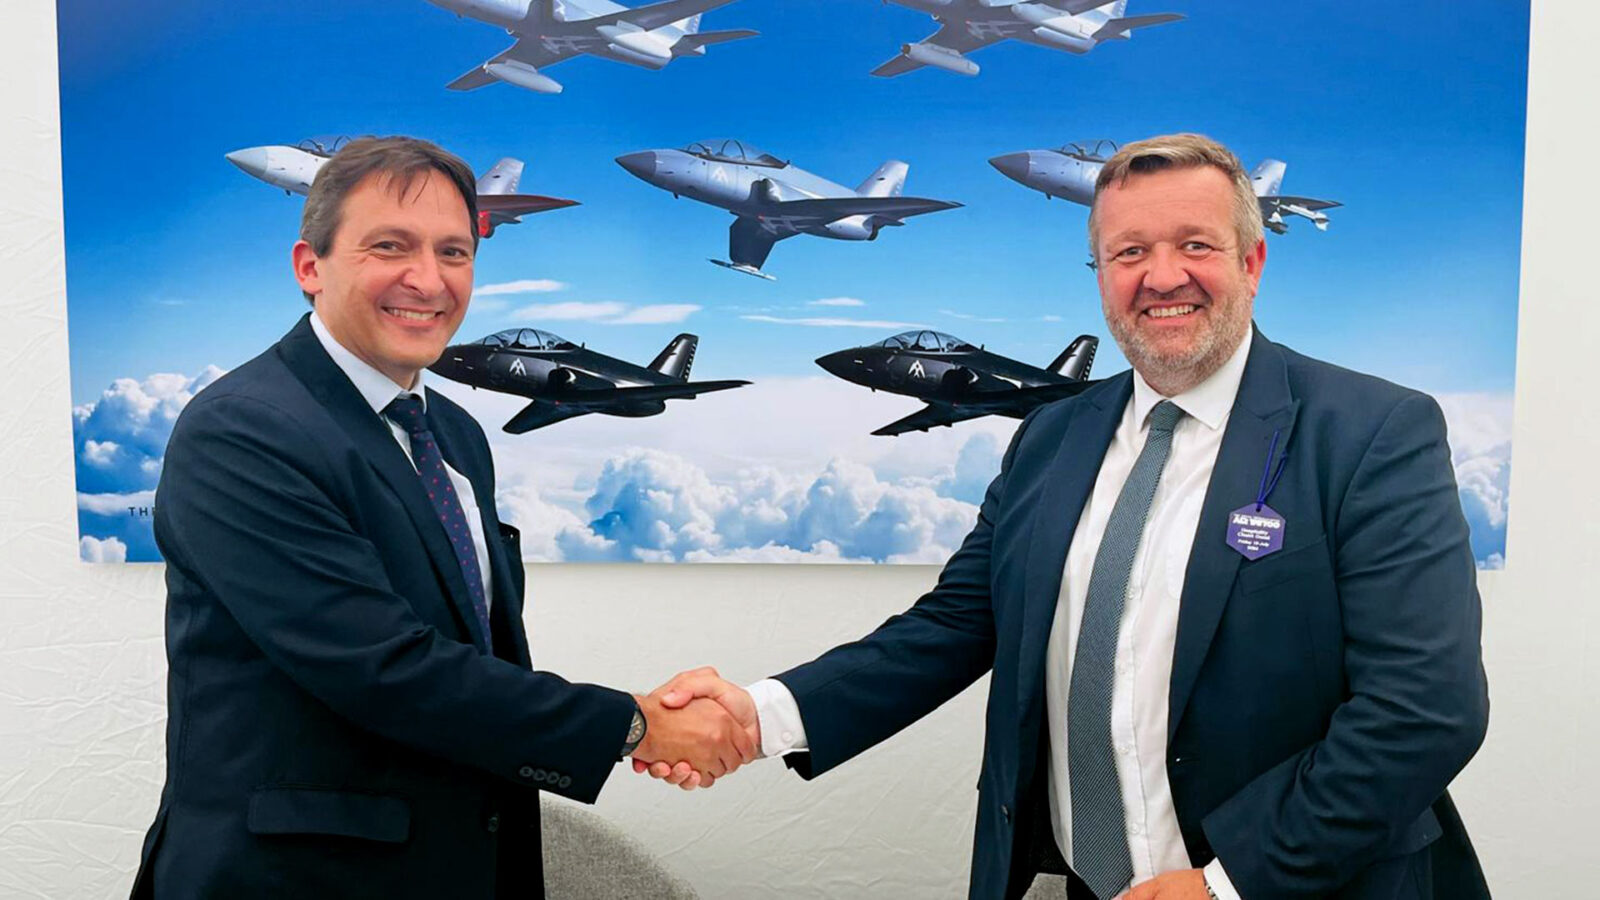 Tristan Crawford, CEO and Founder of AERALIS is pictured shaking hands with Andrew Ferguson, VP Sales and Business Development, EMEA and APAC for StandardAero, in front of a large picture of a formation of seven AERALIS jets in different mission configurations.